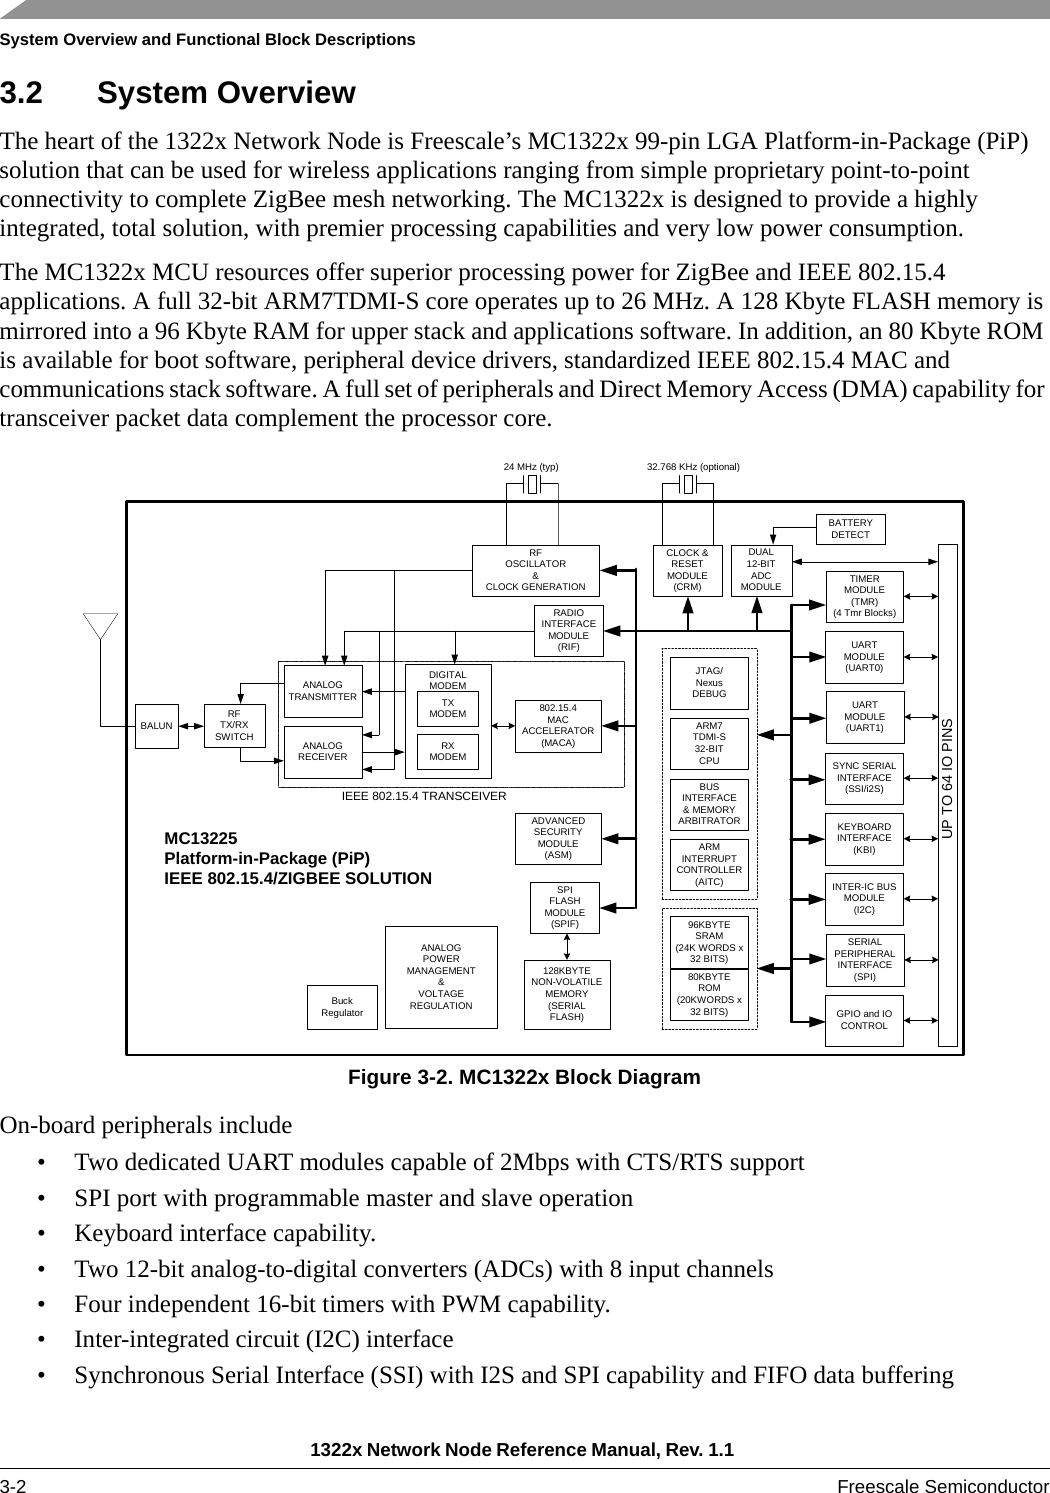 System Overview and Functional Block Descriptions1322x Network Node Reference Manual, Rev. 1.1 3-2 Freescale Semiconductor3.2 System OverviewThe heart of the 1322x Network Node is Freescale’s MC1322x 99-pin LGA Platform-in-Package (PiP) solution that can be used for wireless applications ranging from simple proprietary point-to-point connectivity to complete ZigBee mesh networking. The MC1322x is designed to provide a highly integrated, total solution, with premier processing capabilities and very low power consumption.The MC1322x MCU resources offer superior processing power for ZigBee and IEEE 802.15.4 applications. A full 32-bit ARM7TDMI-S core operates up to 26 MHz. A 128 Kbyte FLASH memory is mirrored into a 96 Kbyte RAM for upper stack and applications software. In addition, an 80 Kbyte ROM is available for boot software, peripheral device drivers, standardized IEEE 802.15.4 MAC and communications stack software. A full set of peripherals and Direct Memory Access (DMA) capability for transceiver packet data complement the processor core.Figure 3-2. MC1322x Block DiagramOn-board peripherals include• Two dedicated UART modules capable of 2Mbps with CTS/RTS support• SPI port with programmable master and slave operation• Keyboard interface capability.• Two 12-bit analog-to-digital converters (ADCs) with 8 input channels• Four independent 16-bit timers with PWM capability.• Inter-integrated circuit (I2C) interface• Synchronous Serial Interface (SSI) with I2S and SPI capability and FIFO data bufferingTIMERMODULE(TMR)(4 Tmr Blocks)UARTMODULE(UART0)UARTMODULE(UART1)SYNC SERIALINTERFACE(SSI/i2S)KEYBOARDINTERFACE(KBI)INTER-IC BUSMODULE(I2C)SERIALPERIPHERALINTERFACE(SPI)DUAL12-BITADCMODULEGPIO and IOCONTROLUP TO 64 IO PINSARM7TDMI-S32-BITCPUBUSINTERFACE&amp; MEMORYARBITRATORARMINTERRUPTCONTROLLER(AITC)JTAG/NexusDEBUGADVANCEDSECURITYMODULE(ASM)CLOCK &amp;RESETMODULE(CRM)RADIOINTERFACEMODULE(RIF)96KBYTESRAM(24K WORDS x32 BITS)80KBYTEROM(20KWORDS x32 BITS)RFOSCILLATOR&amp;CLOCK GENERATIONSPIFLASHMODULE(SPIF)802.15.4MACACCELERATOR(MACA)DIGITALMODEMTXMODEMRXMODEM128KBYTENON-VOLATILEMEMORY(SERIALFLASH)ANALOGTRANSMITTERANALOGRECEIVERRFTX/RXSWITCHIEEE 802.15.4 TRANSCEIVERBALUNANALOGPOWERMANAGEMENT&amp;VOLTAGEREGULATIONMC13225Platform-in-Package (PiP)IEEE 802.15.4/ZIGBEE SOLUTIONBuckRegulator24 MHz (typ) 32.768 KHz (optional)BATTERYDETECT